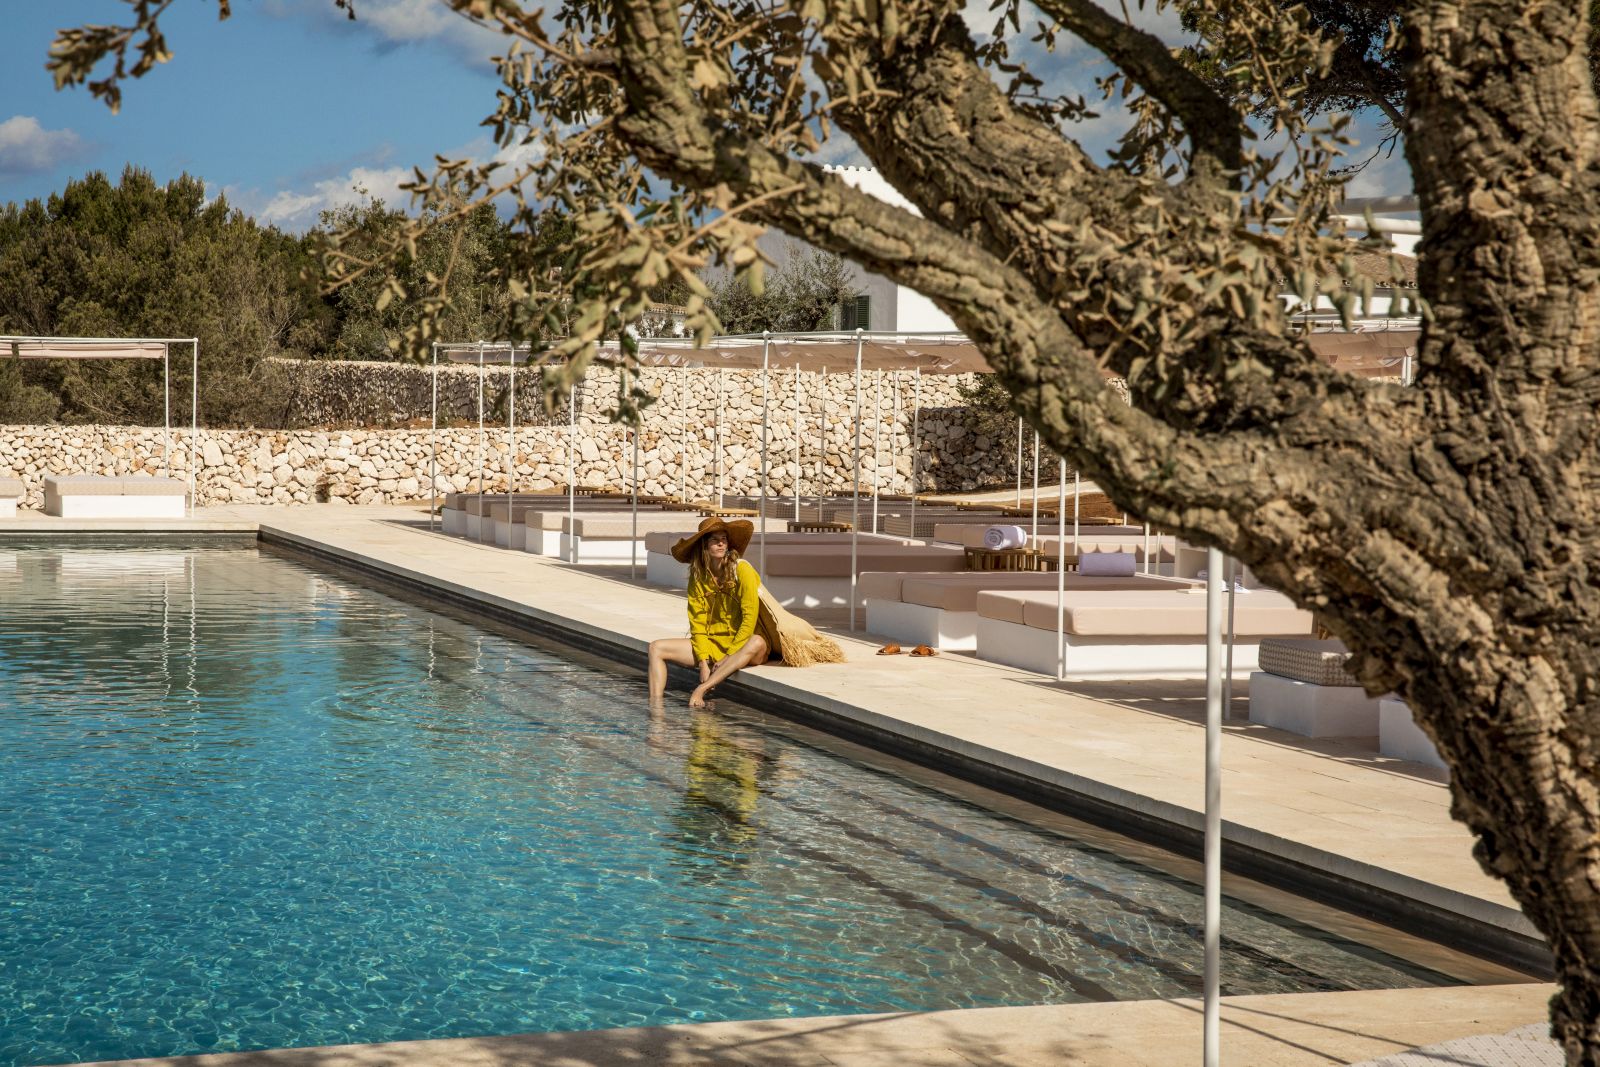 Guest enjoying the outdoor pool at the Menorca Experimental hotel